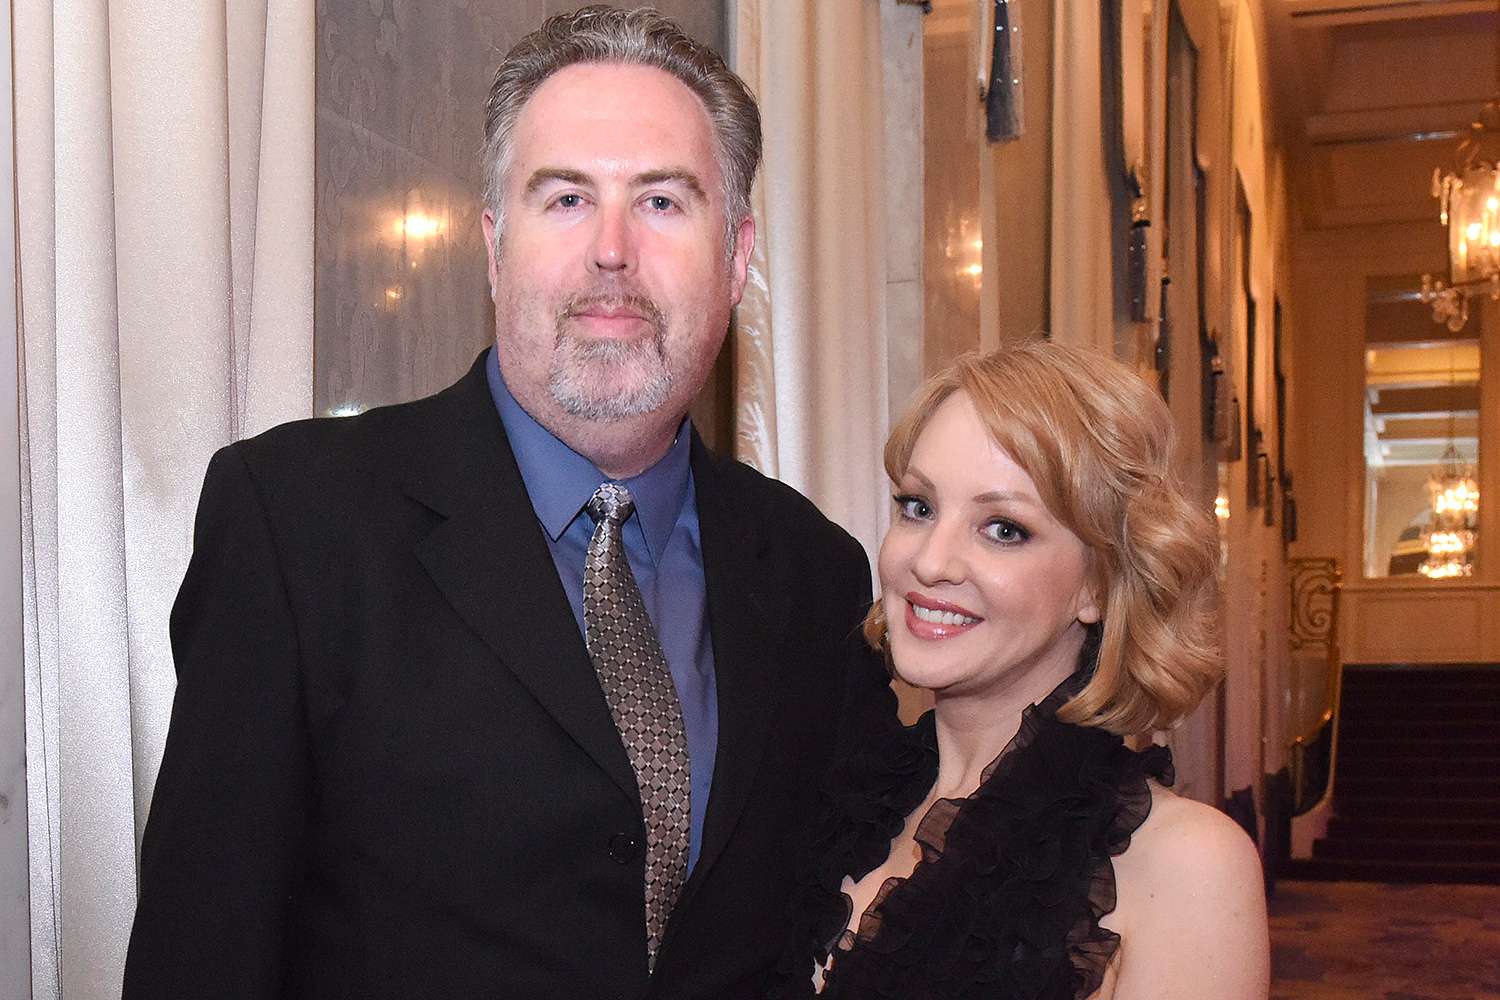 Greg Covey and actress Wendi McLendon-Covey